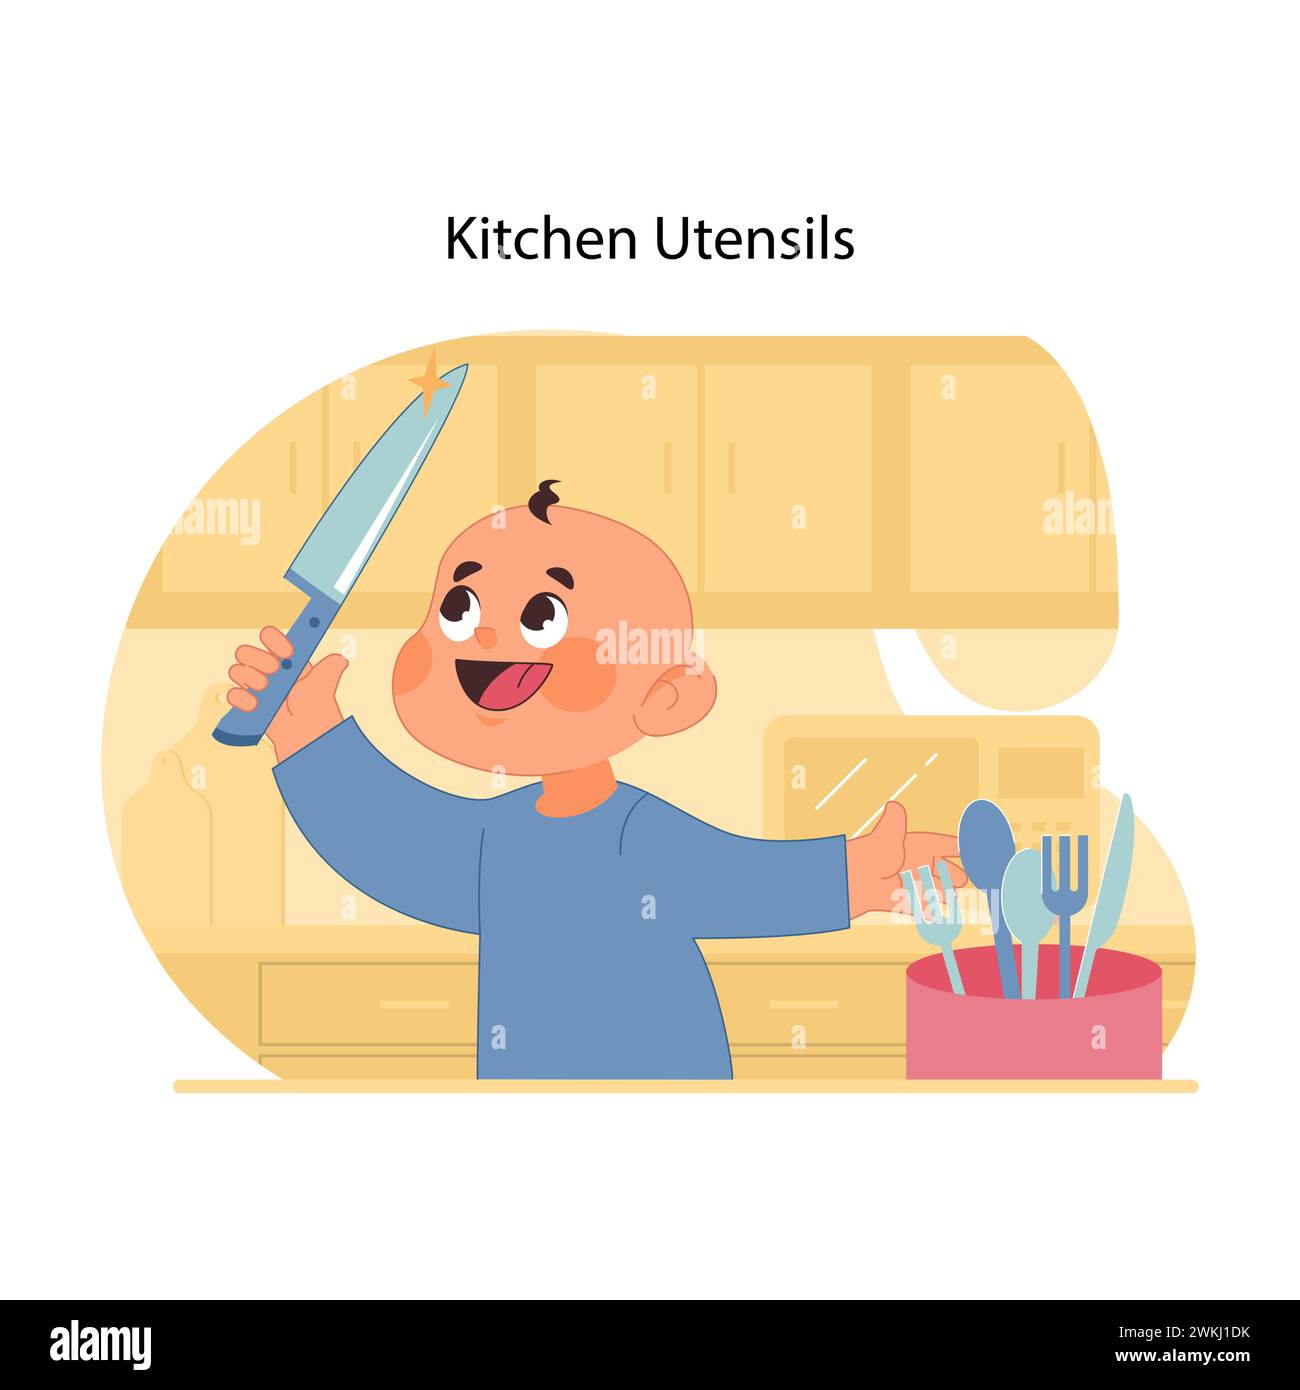 Cutlery safety awareness. Happy toddler playfully and curiously wielding kitchen knife, unaware of potential danger it poses. Preventing injuries and accidents with kids. Flat vector illustration Stock Vector